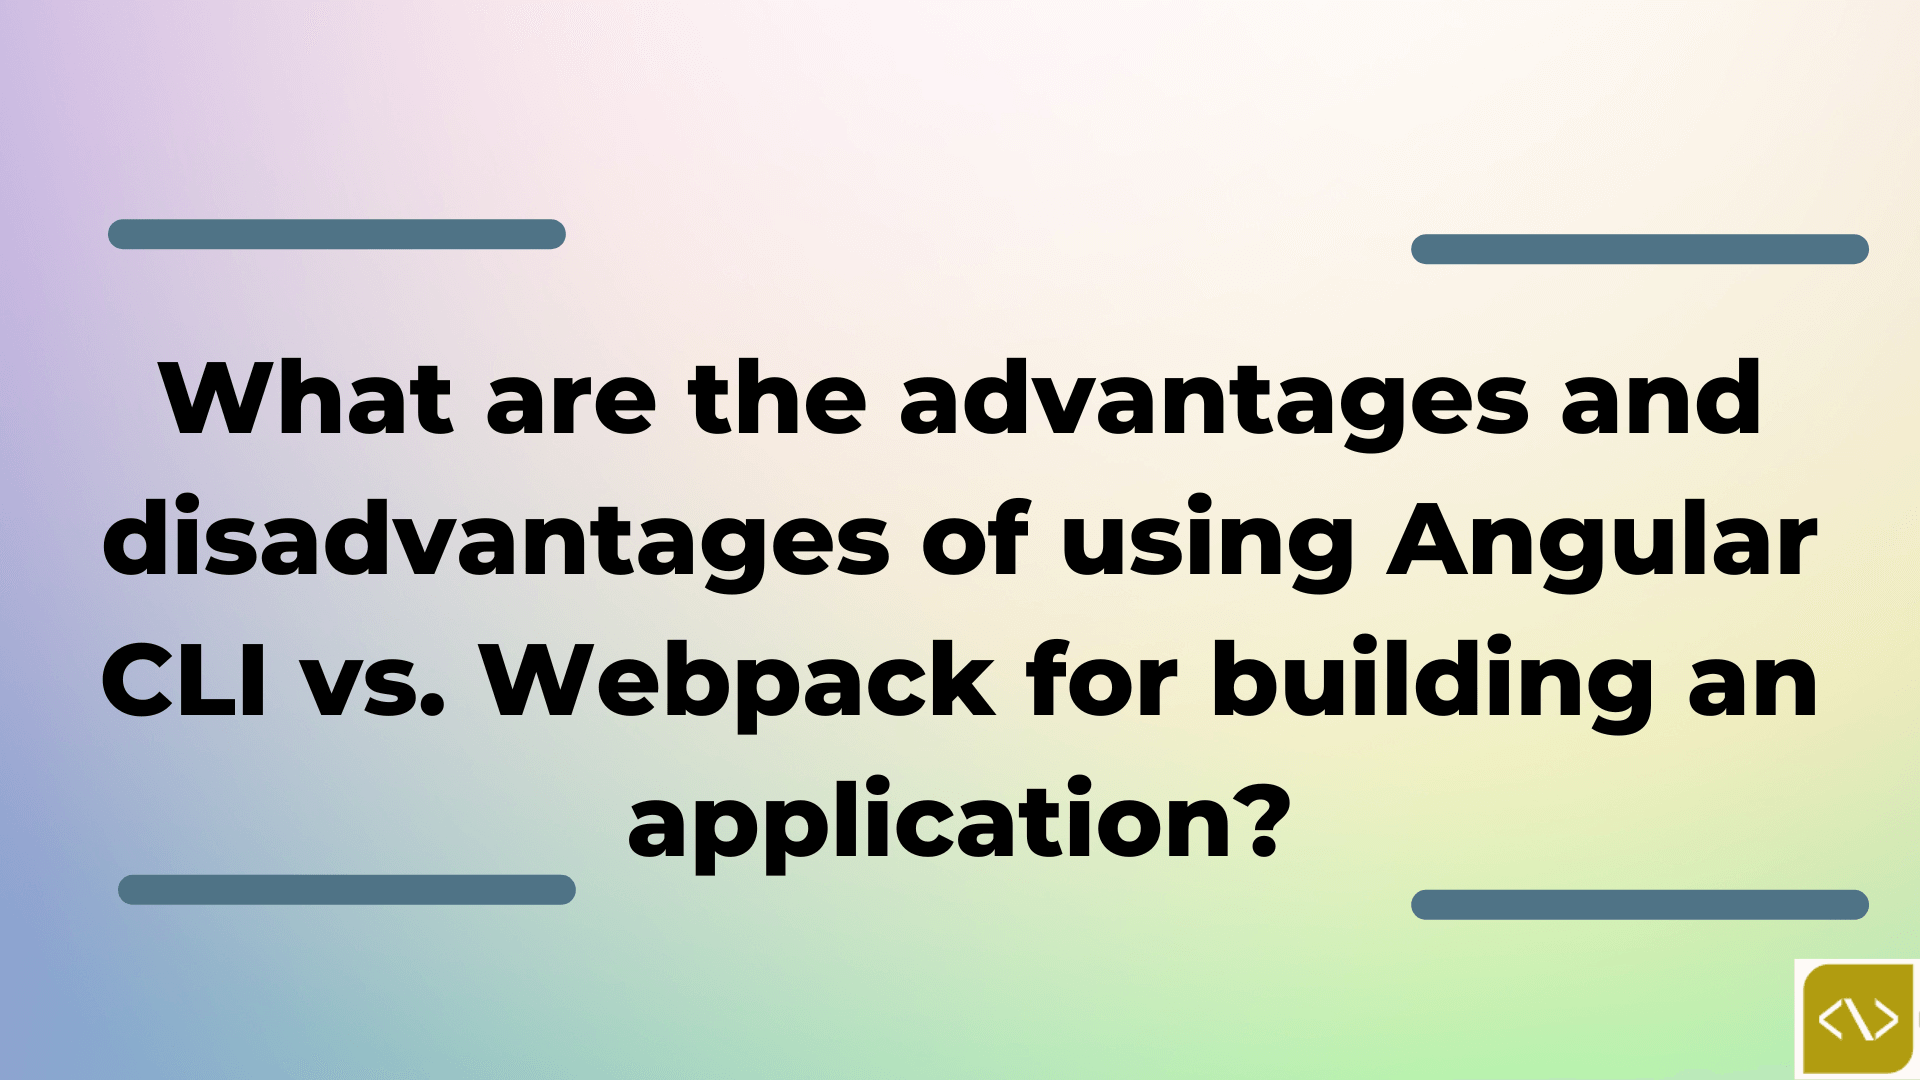 What are the advantages and disadvantages of using Angular CLI vs. Webpack for building an application?